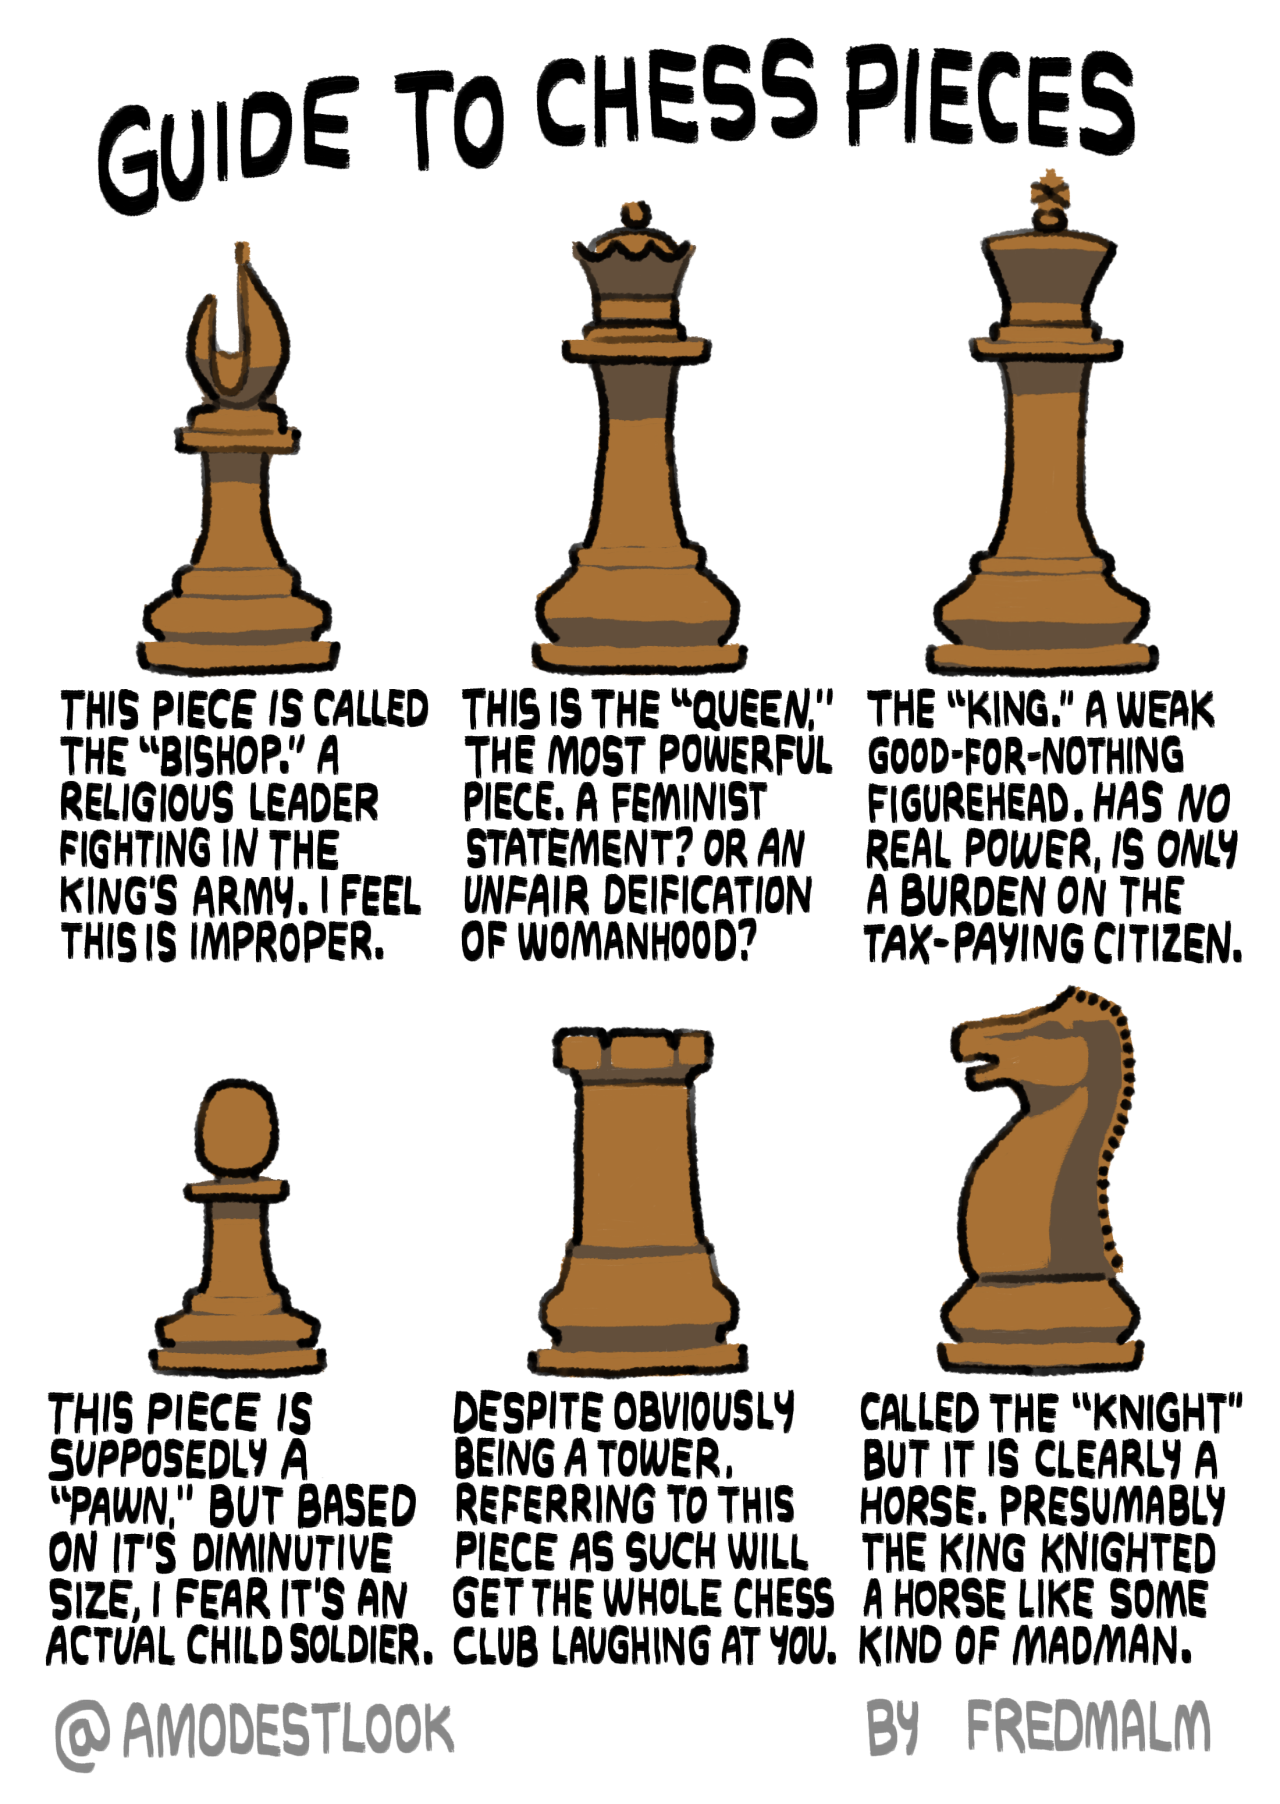 Think you know everything about the #knight? Check out this #chess